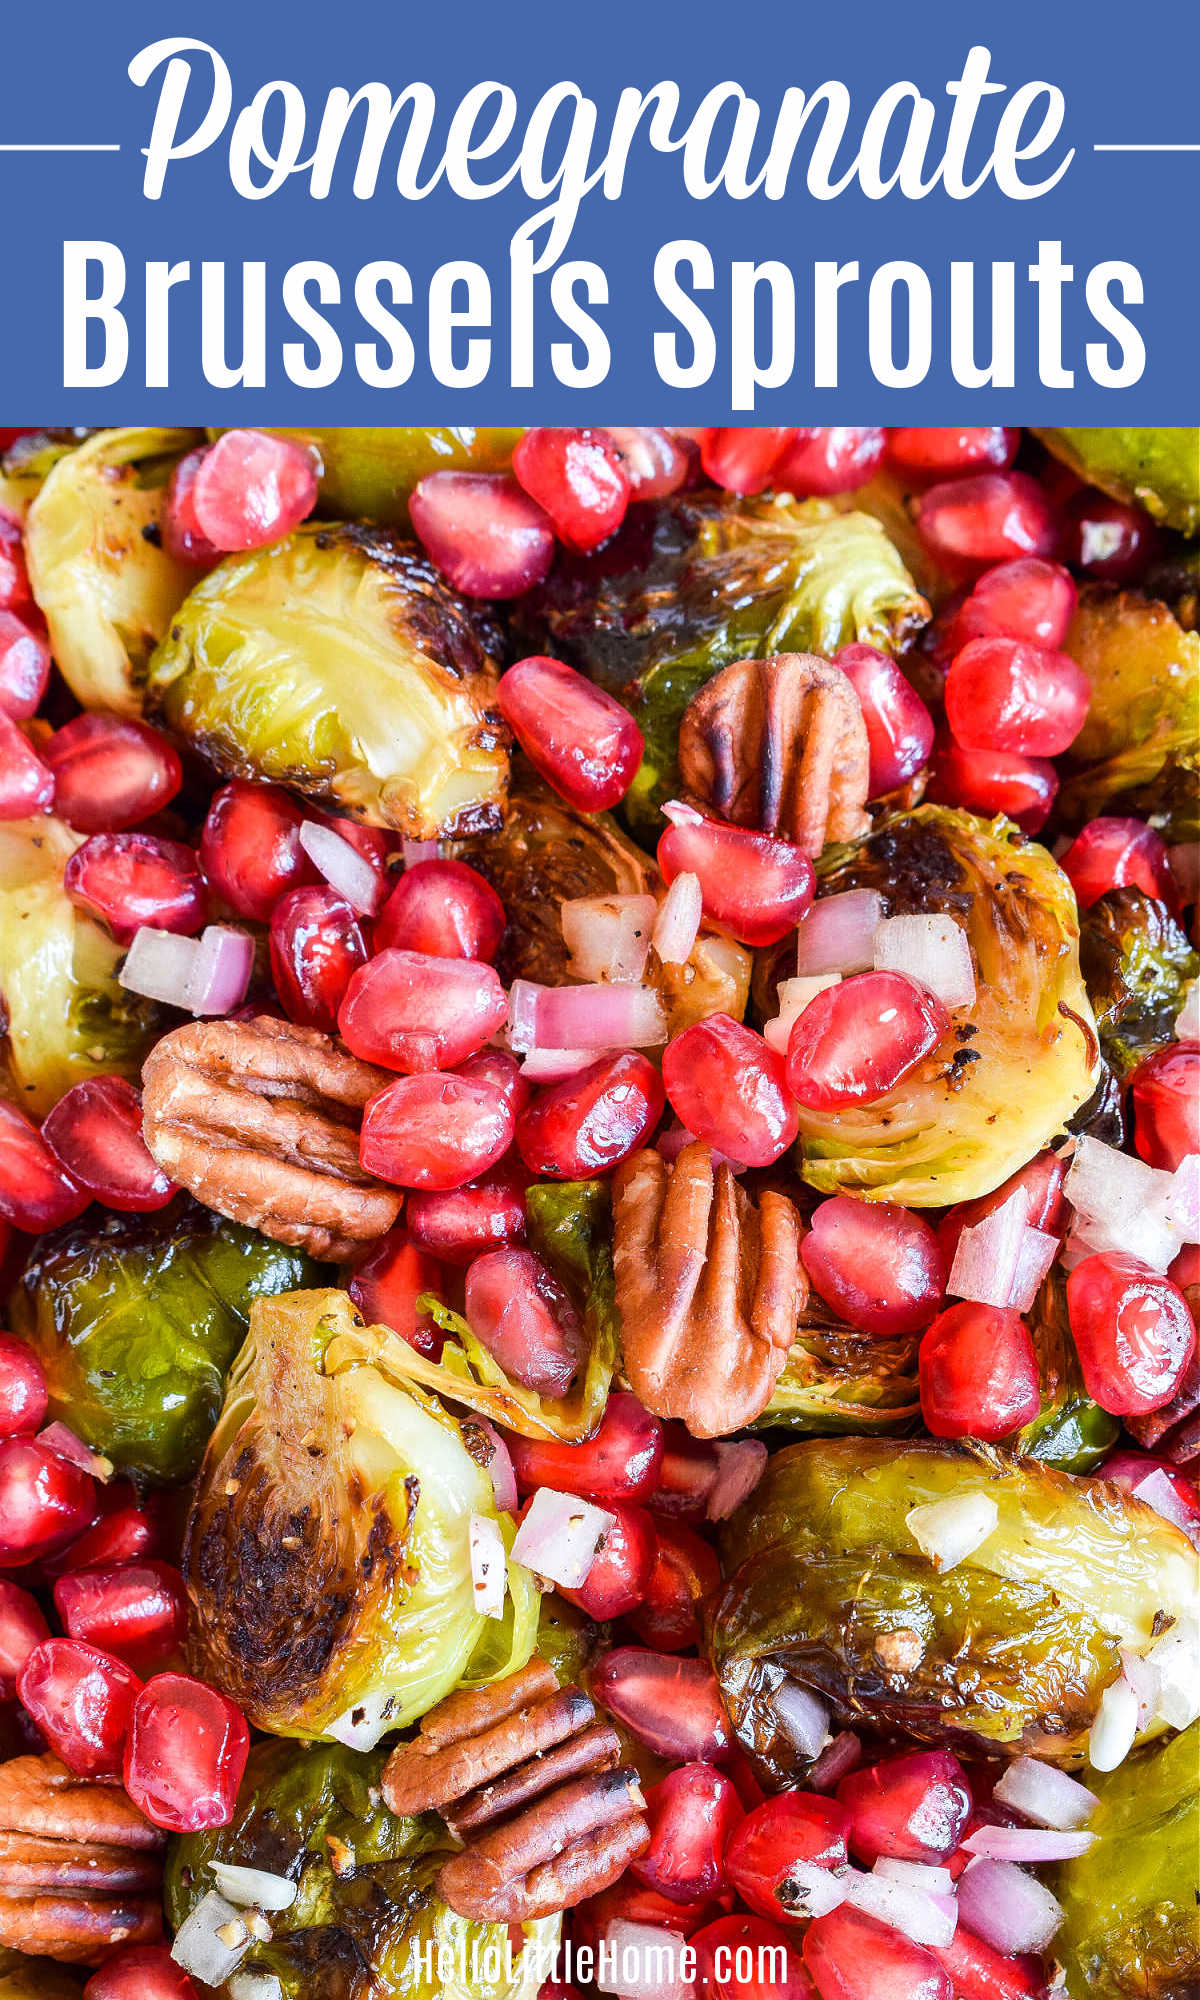 Roasted Brussels Sprouts with Pomegranate Seeds